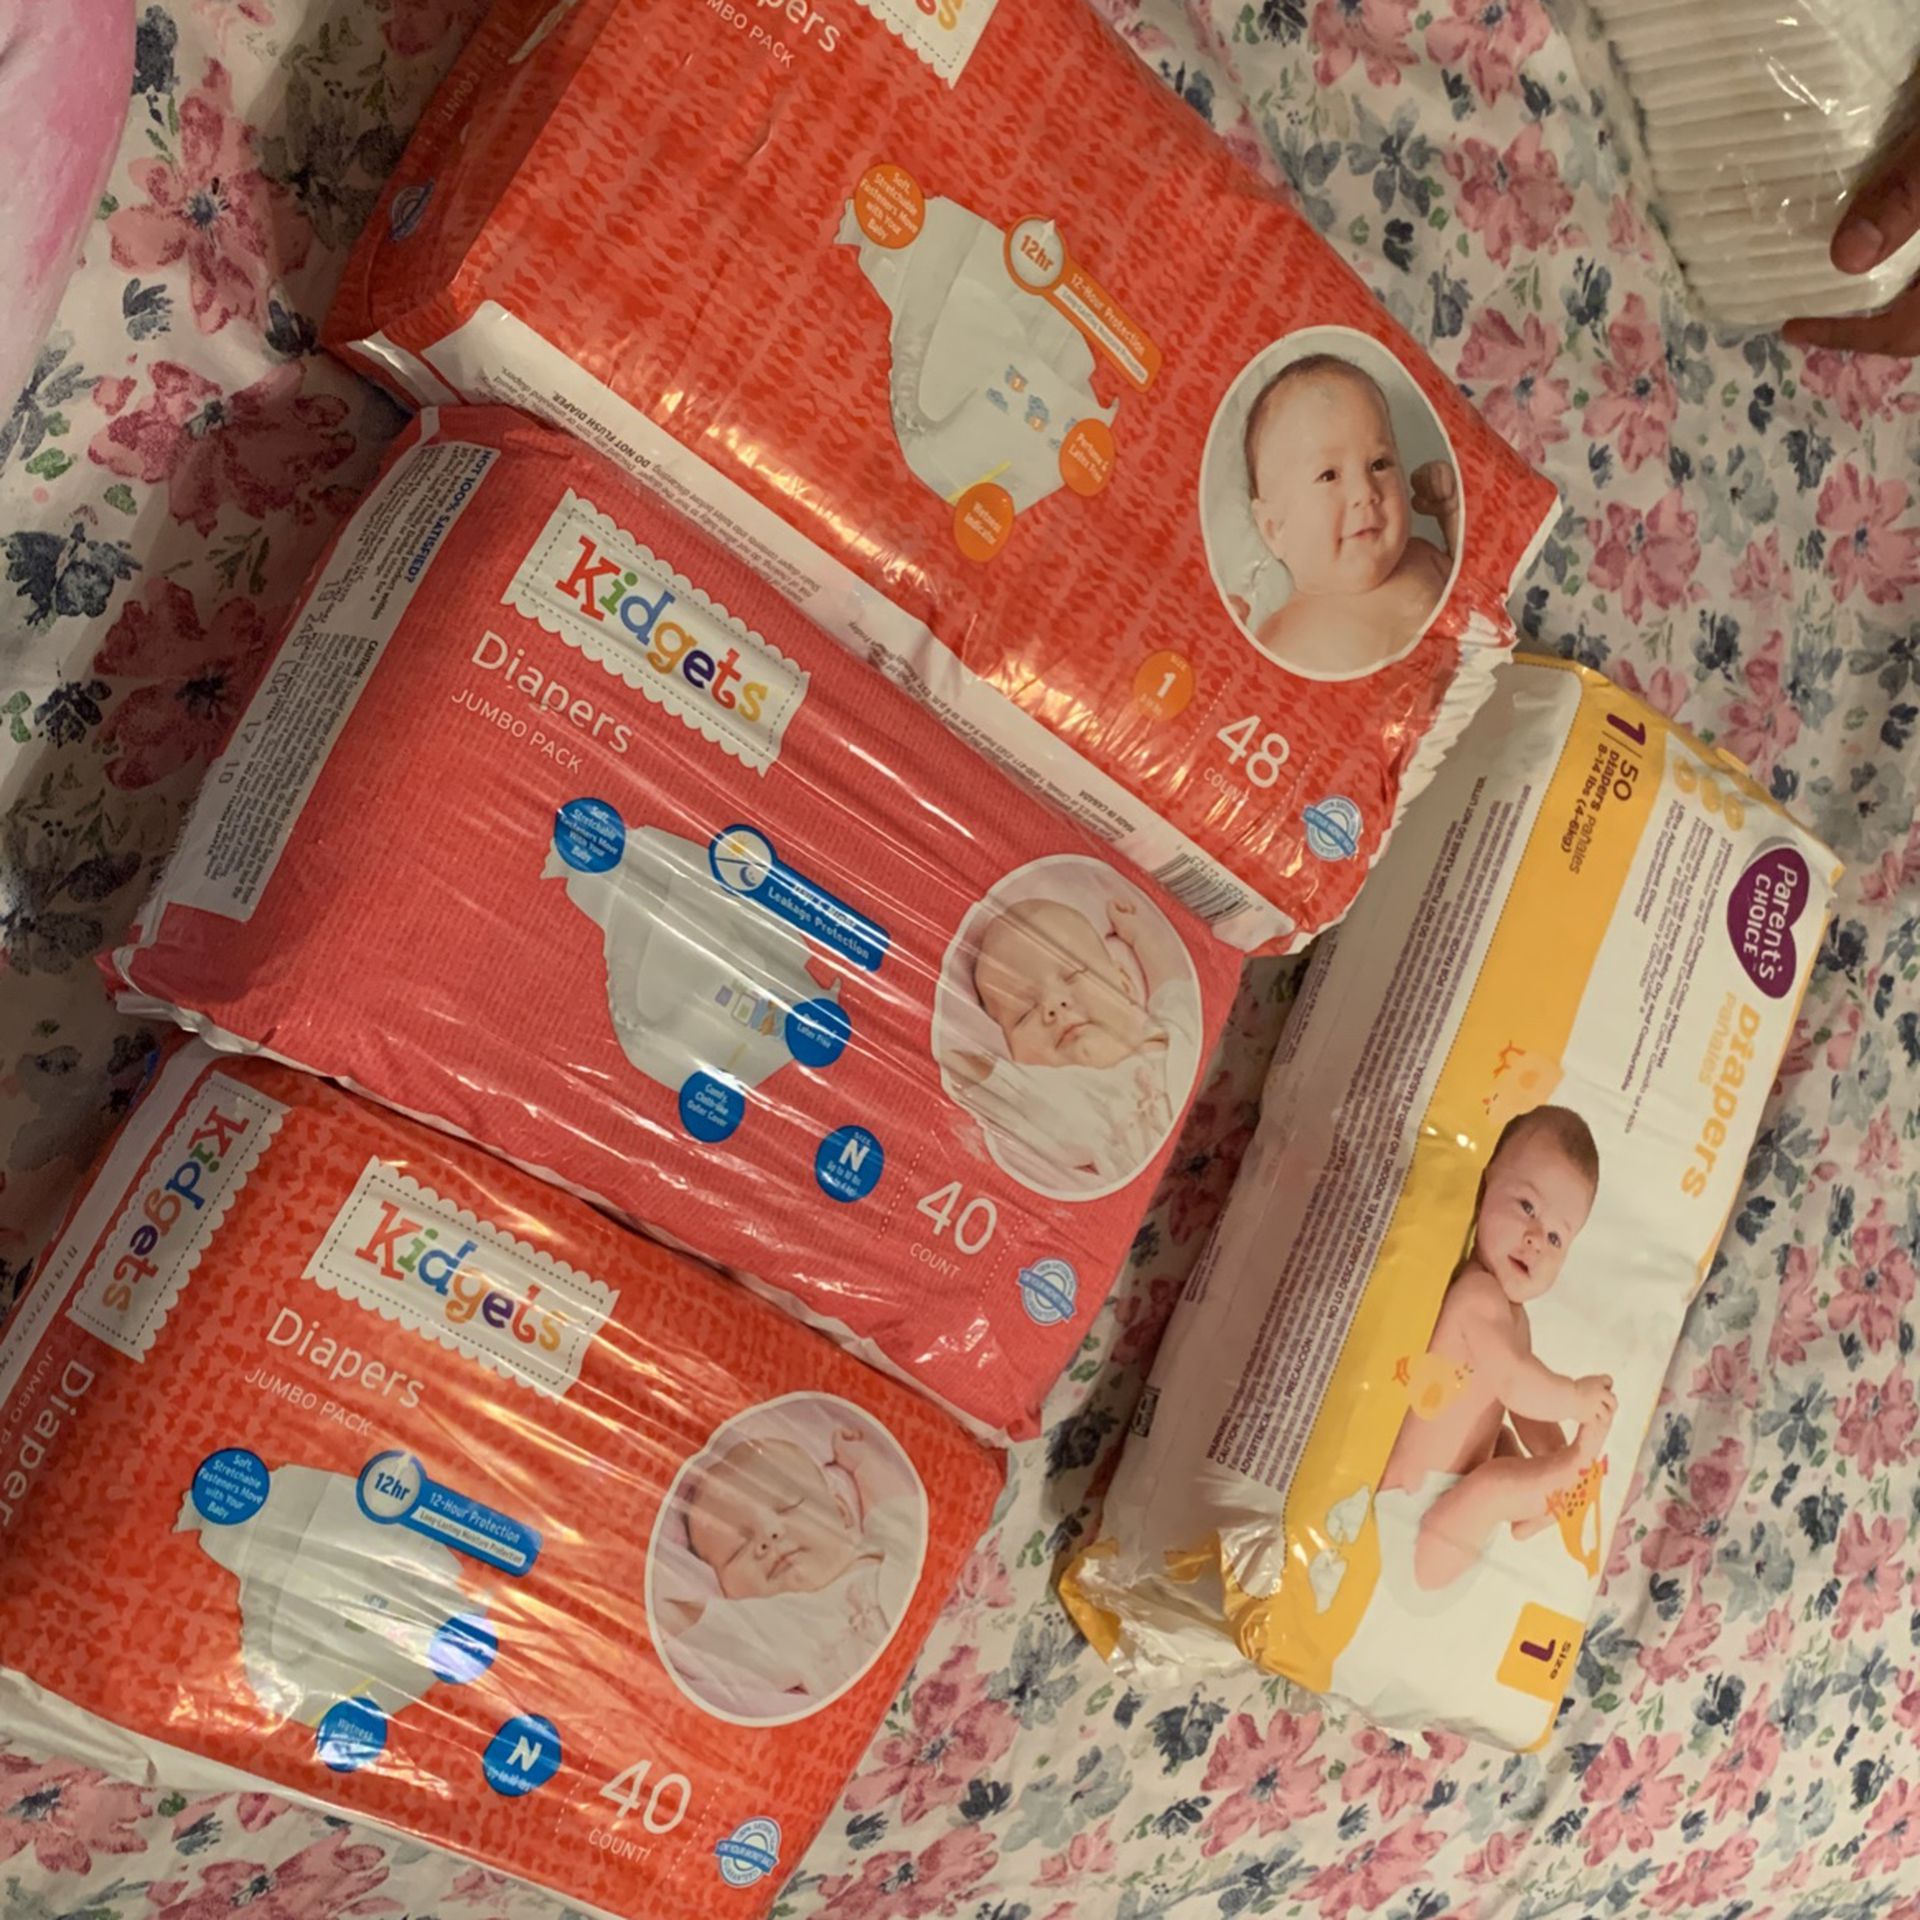 Kidgets Diapers And Parents Choice .